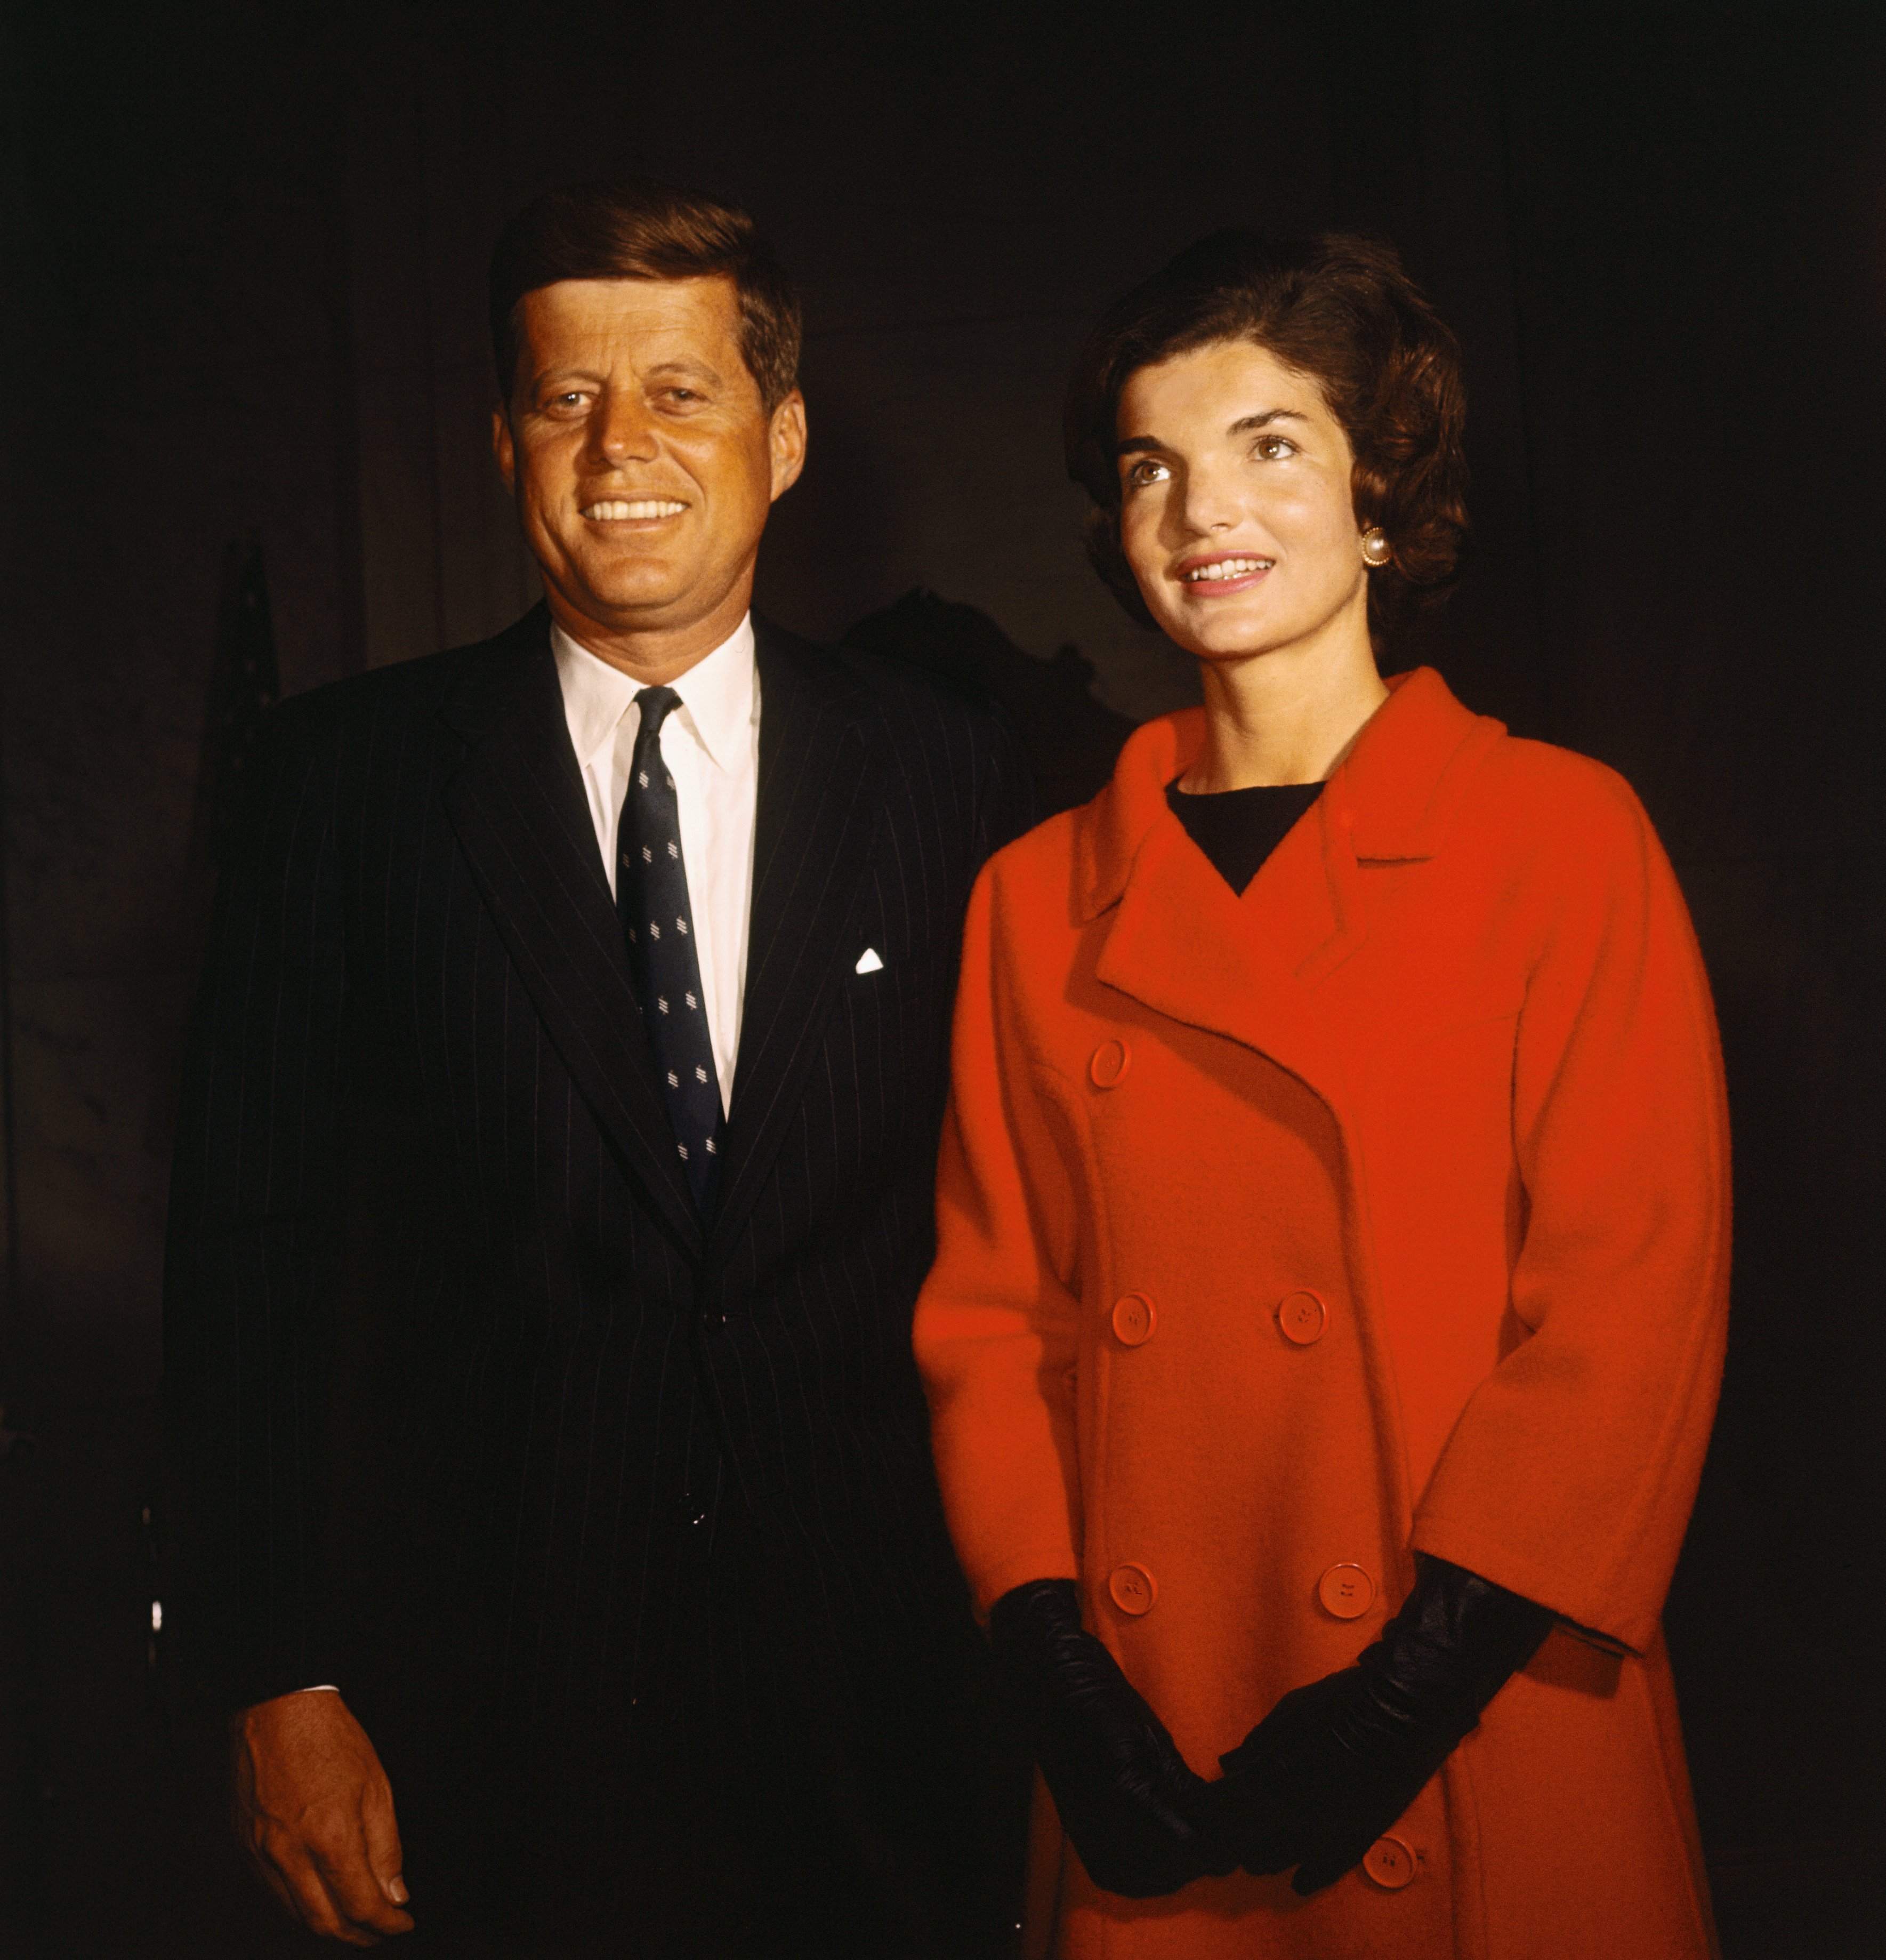 John F. Kennedy and wife Jacqueline Kennedy during his announcement for seeking presidential nomination on January 2, 1960 | Photo: Getty Images